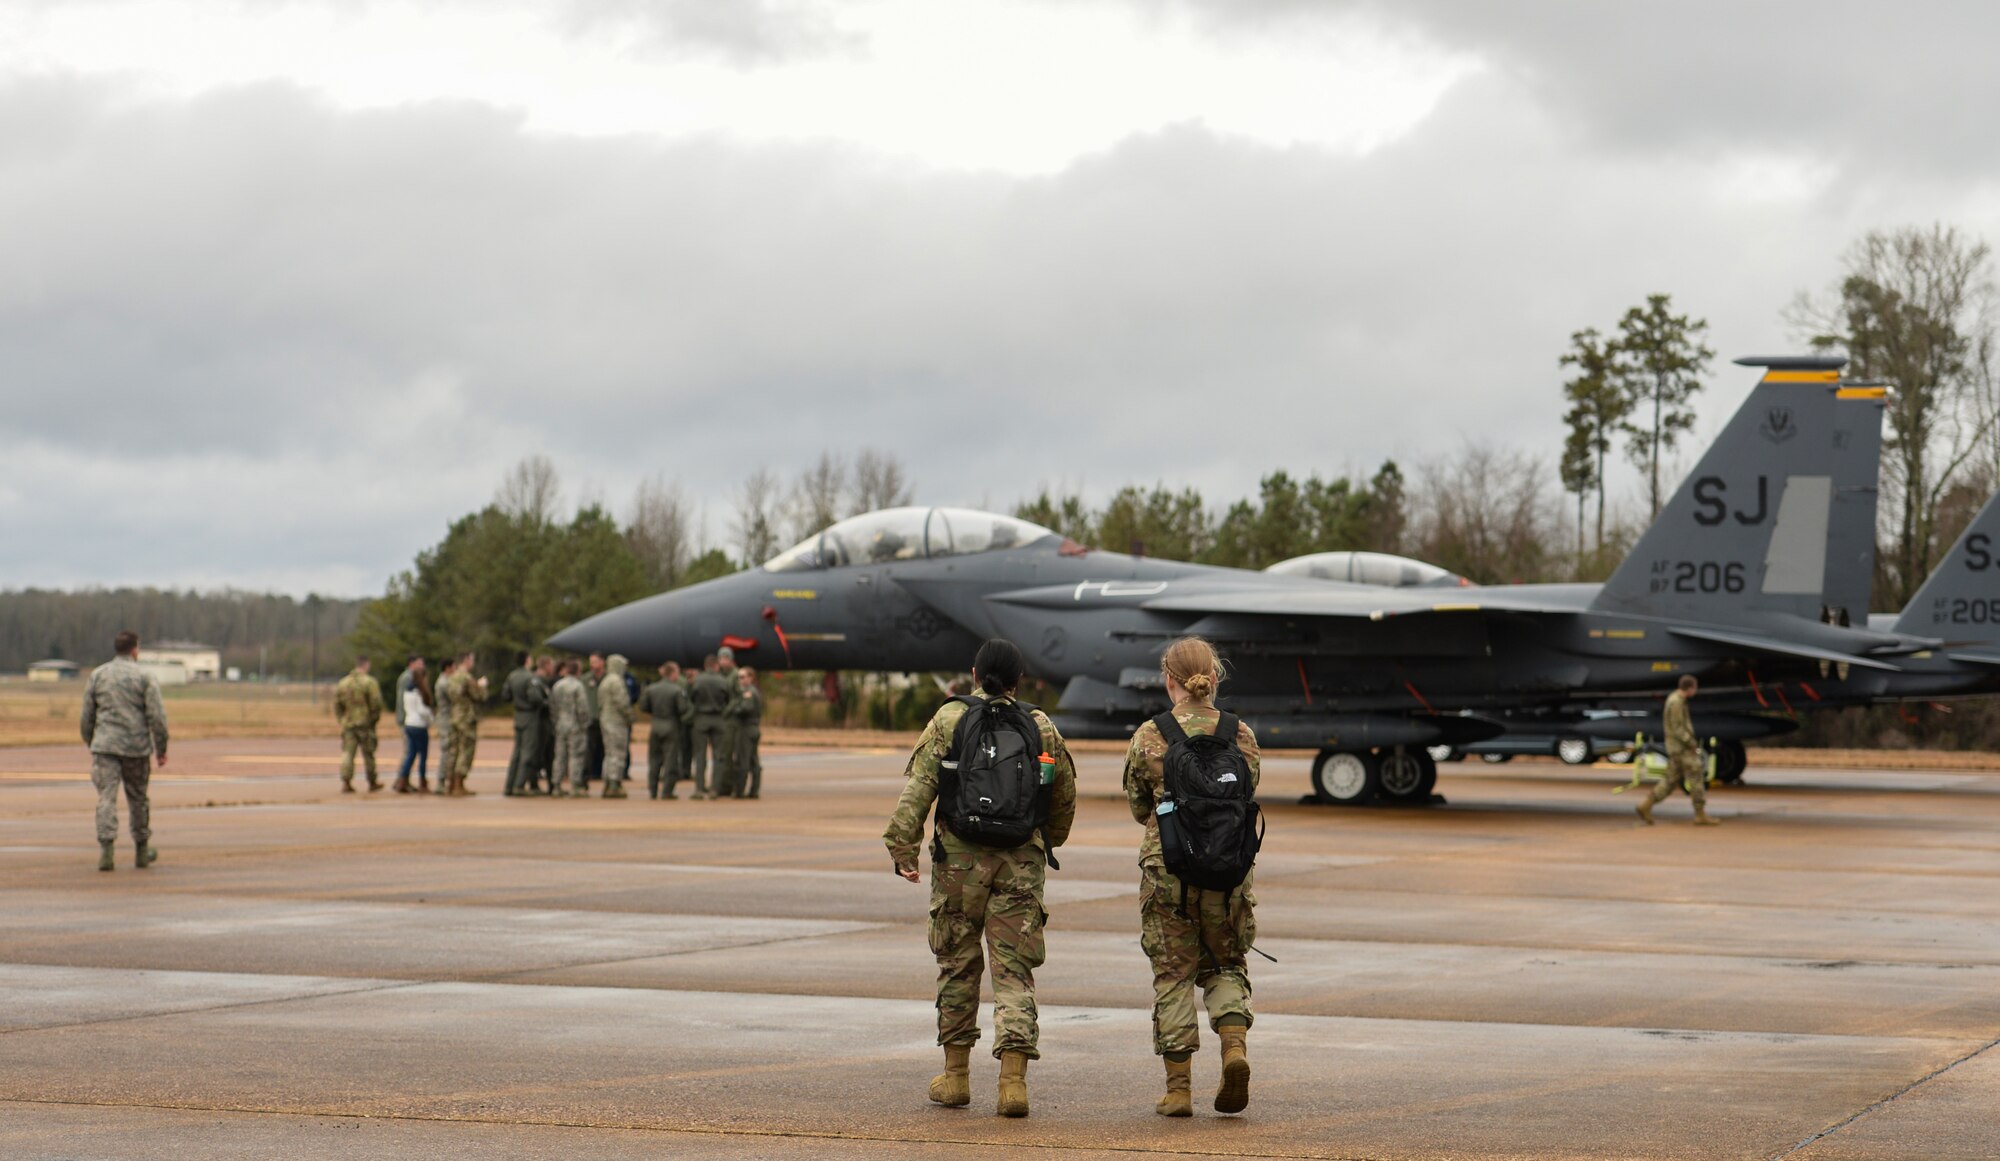 Two Airmen walk toward a group being briefed on the capabilities of the F-15E Strike Eagle Dec. 10, 2019, at Columbus Air Force Base, Miss. An array of avionics and electronics systems gives the F-15E the capability to fight at low altitude, day or night and in all weather. (U.S. Air Force photo by Airman Davis Donaldson)